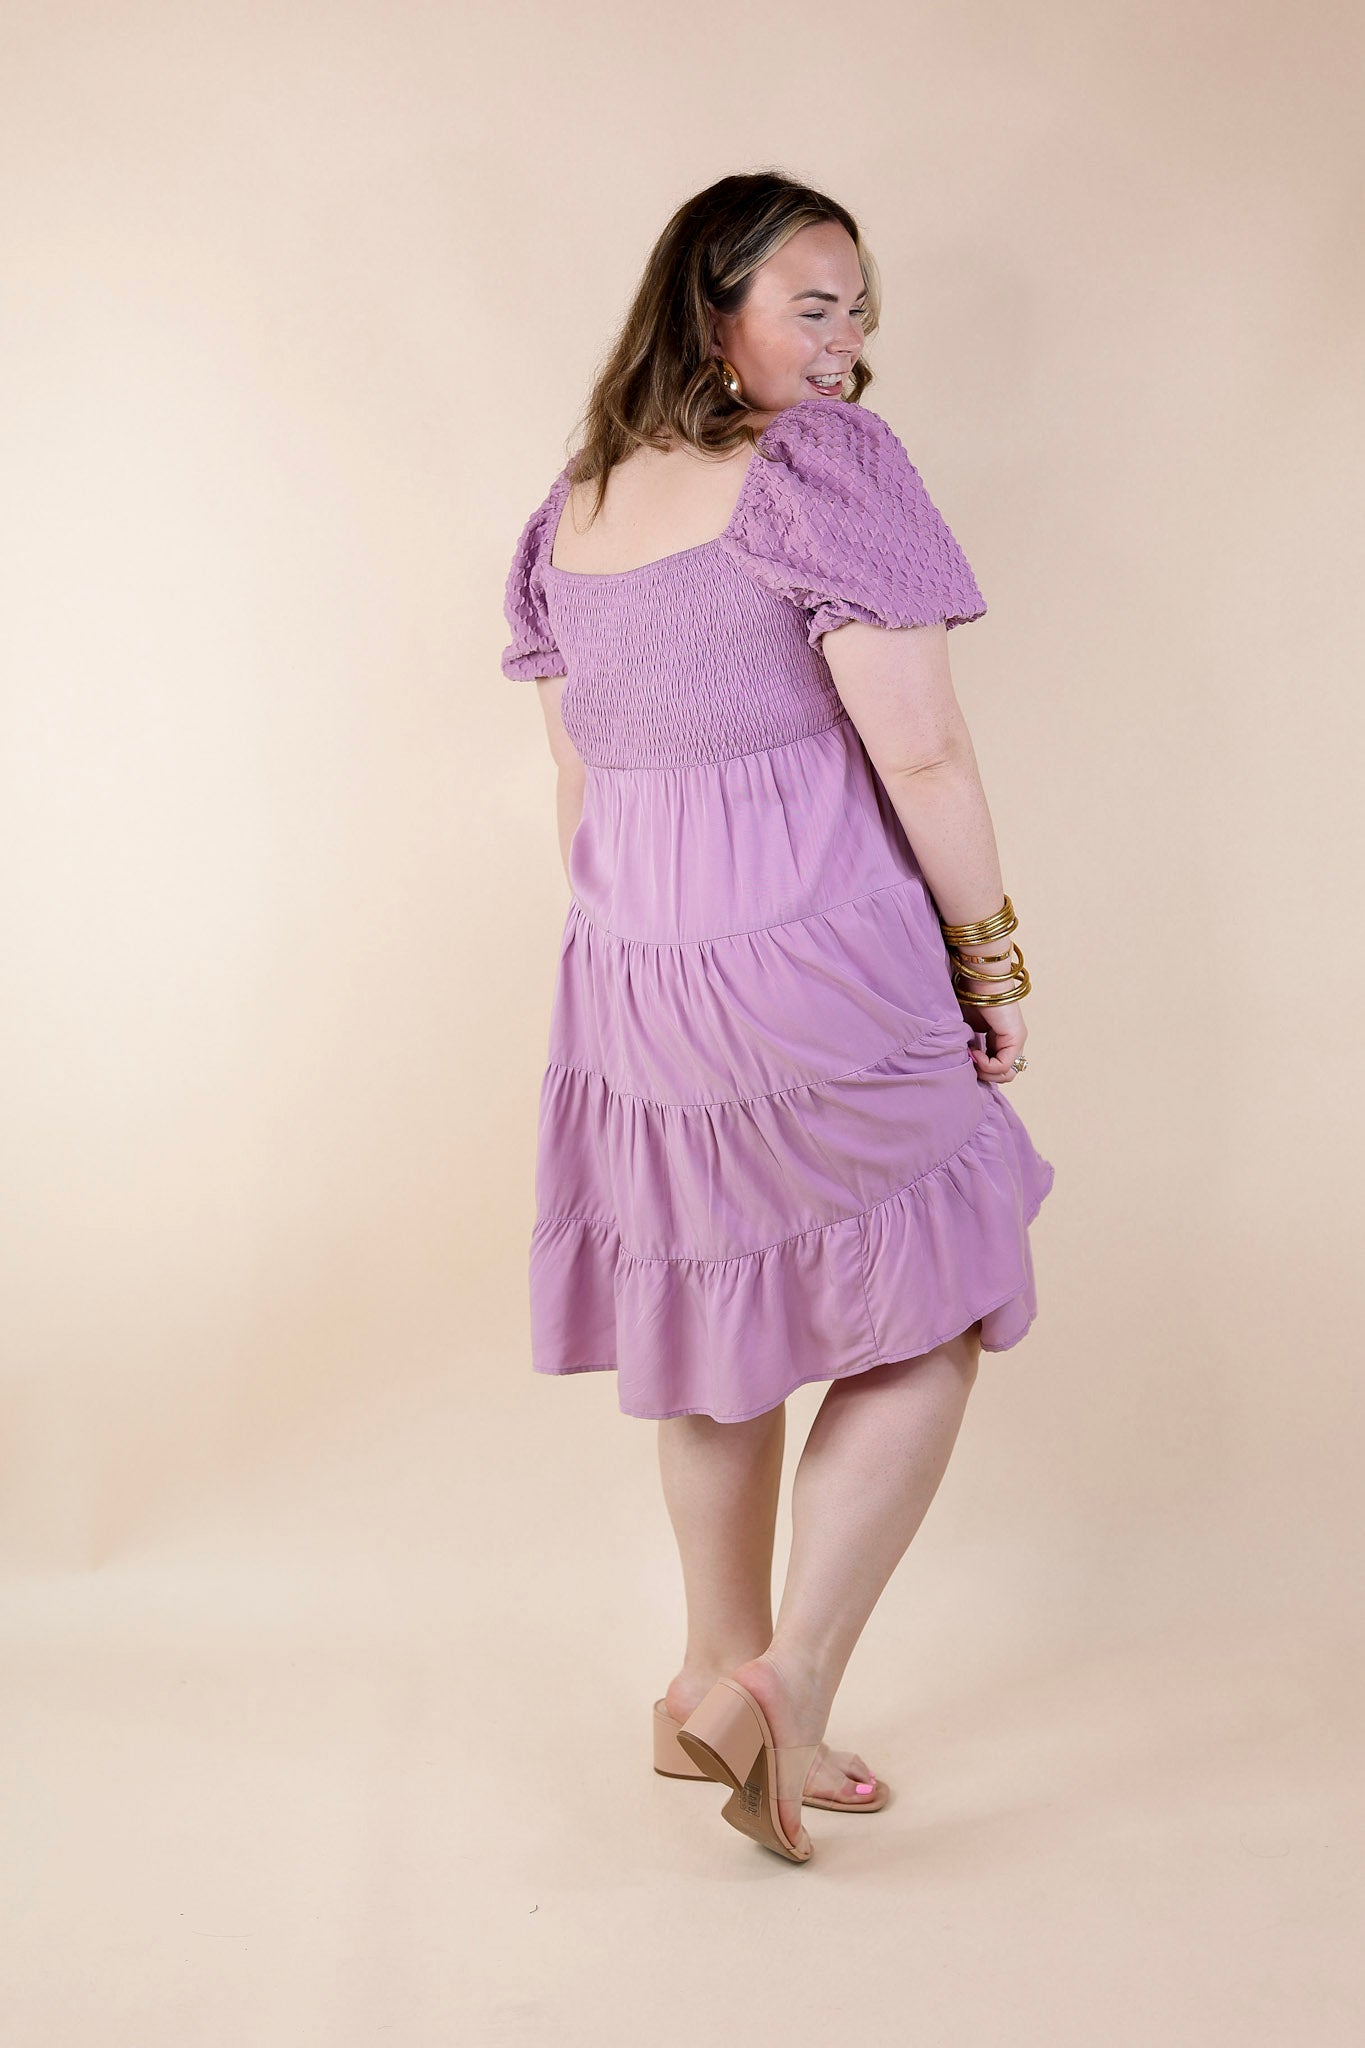 Coastal Cruising Babydoll Dress with Short Balloon Sleeves in Lavender Purple - Giddy Up Glamour Boutique